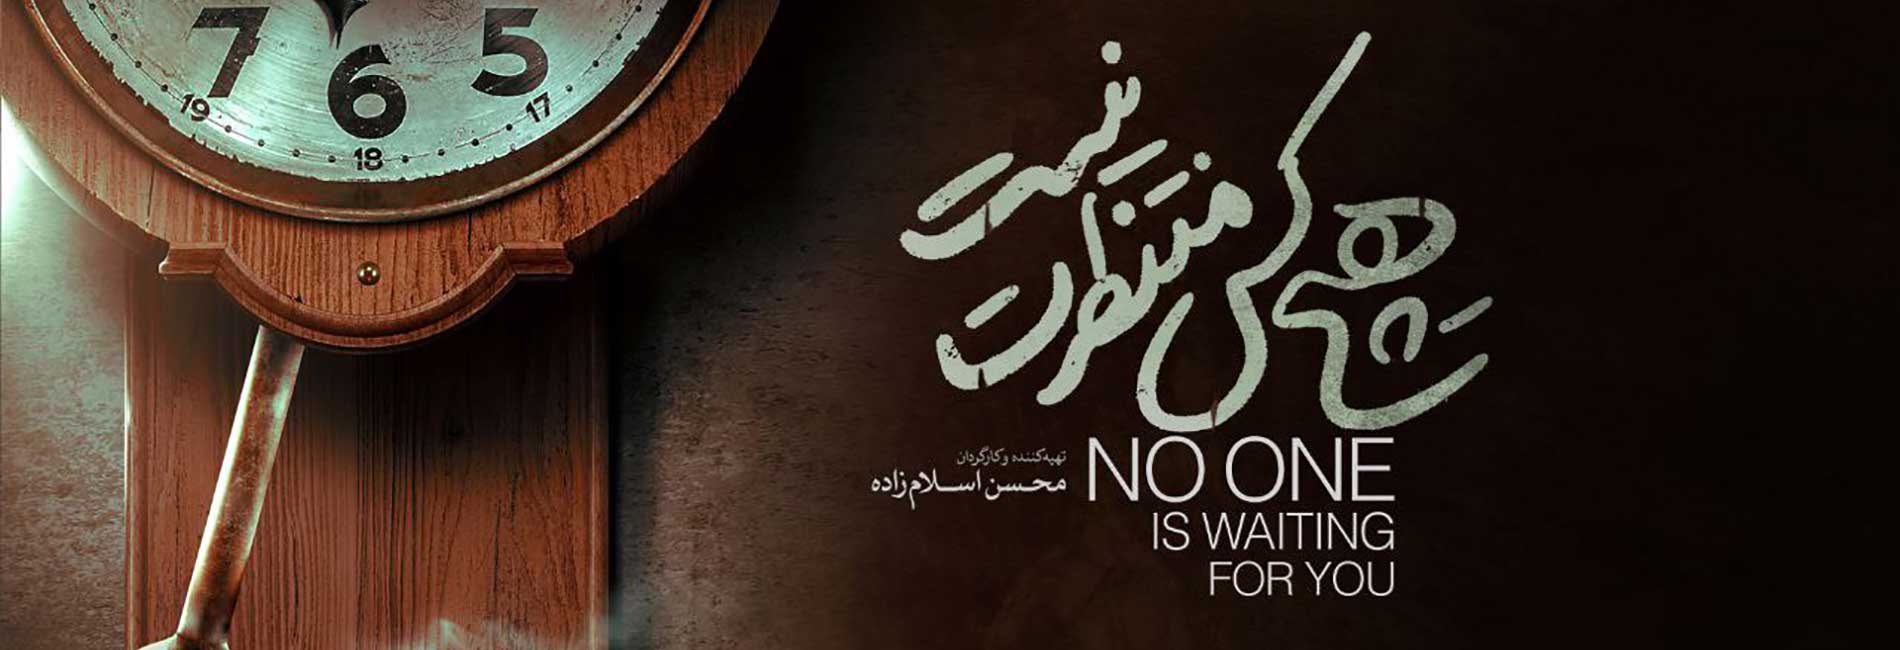 No one is waiting for you-هاشور